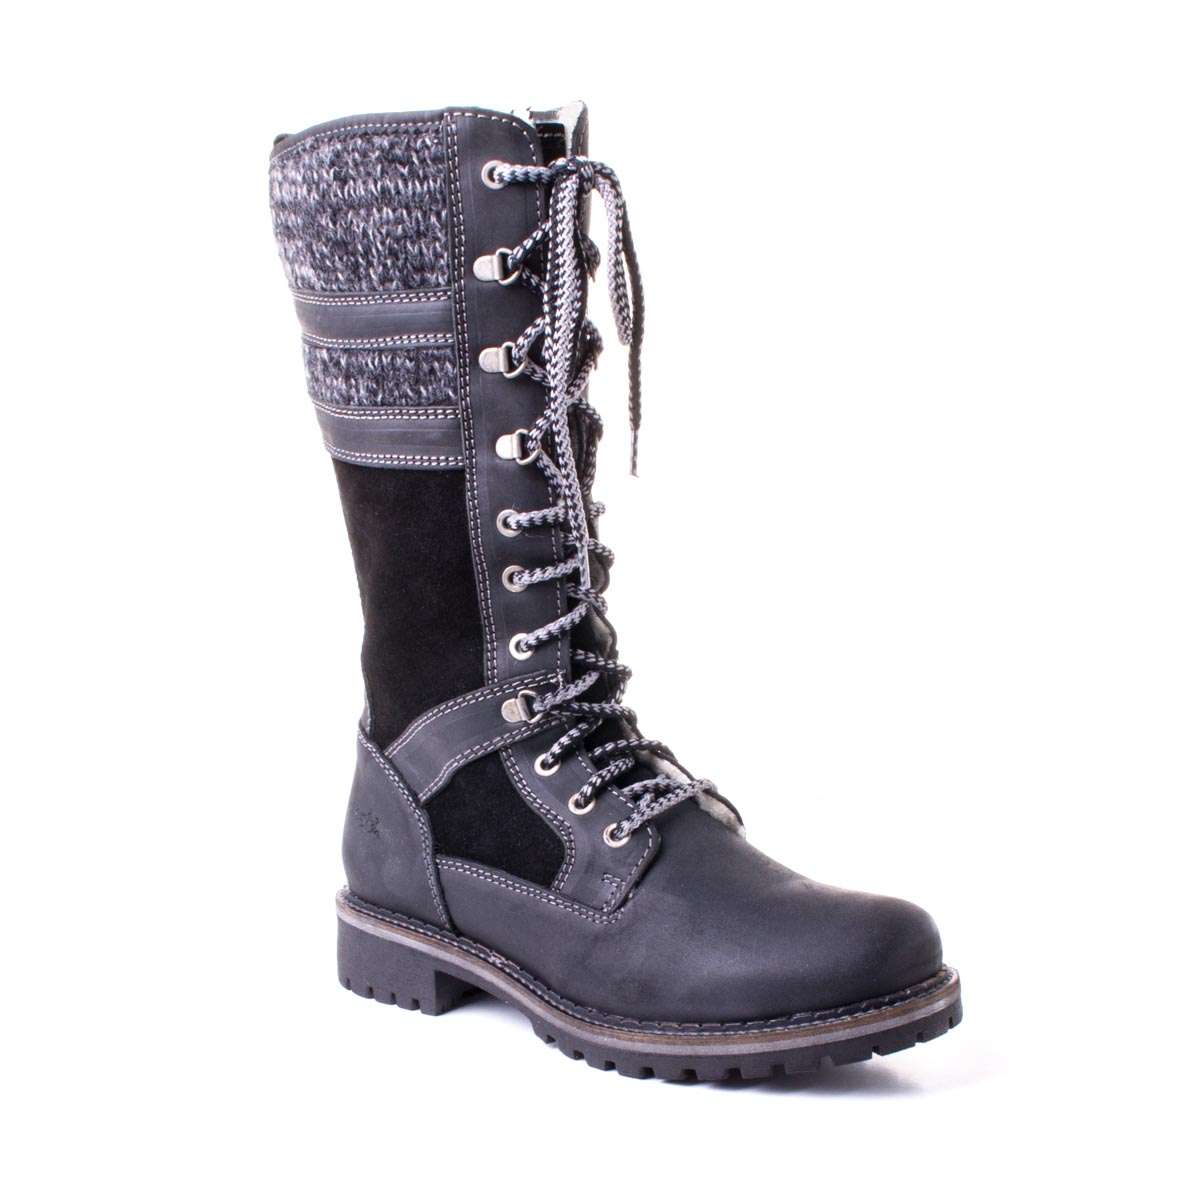 Bos&Co Women's Holden Boot